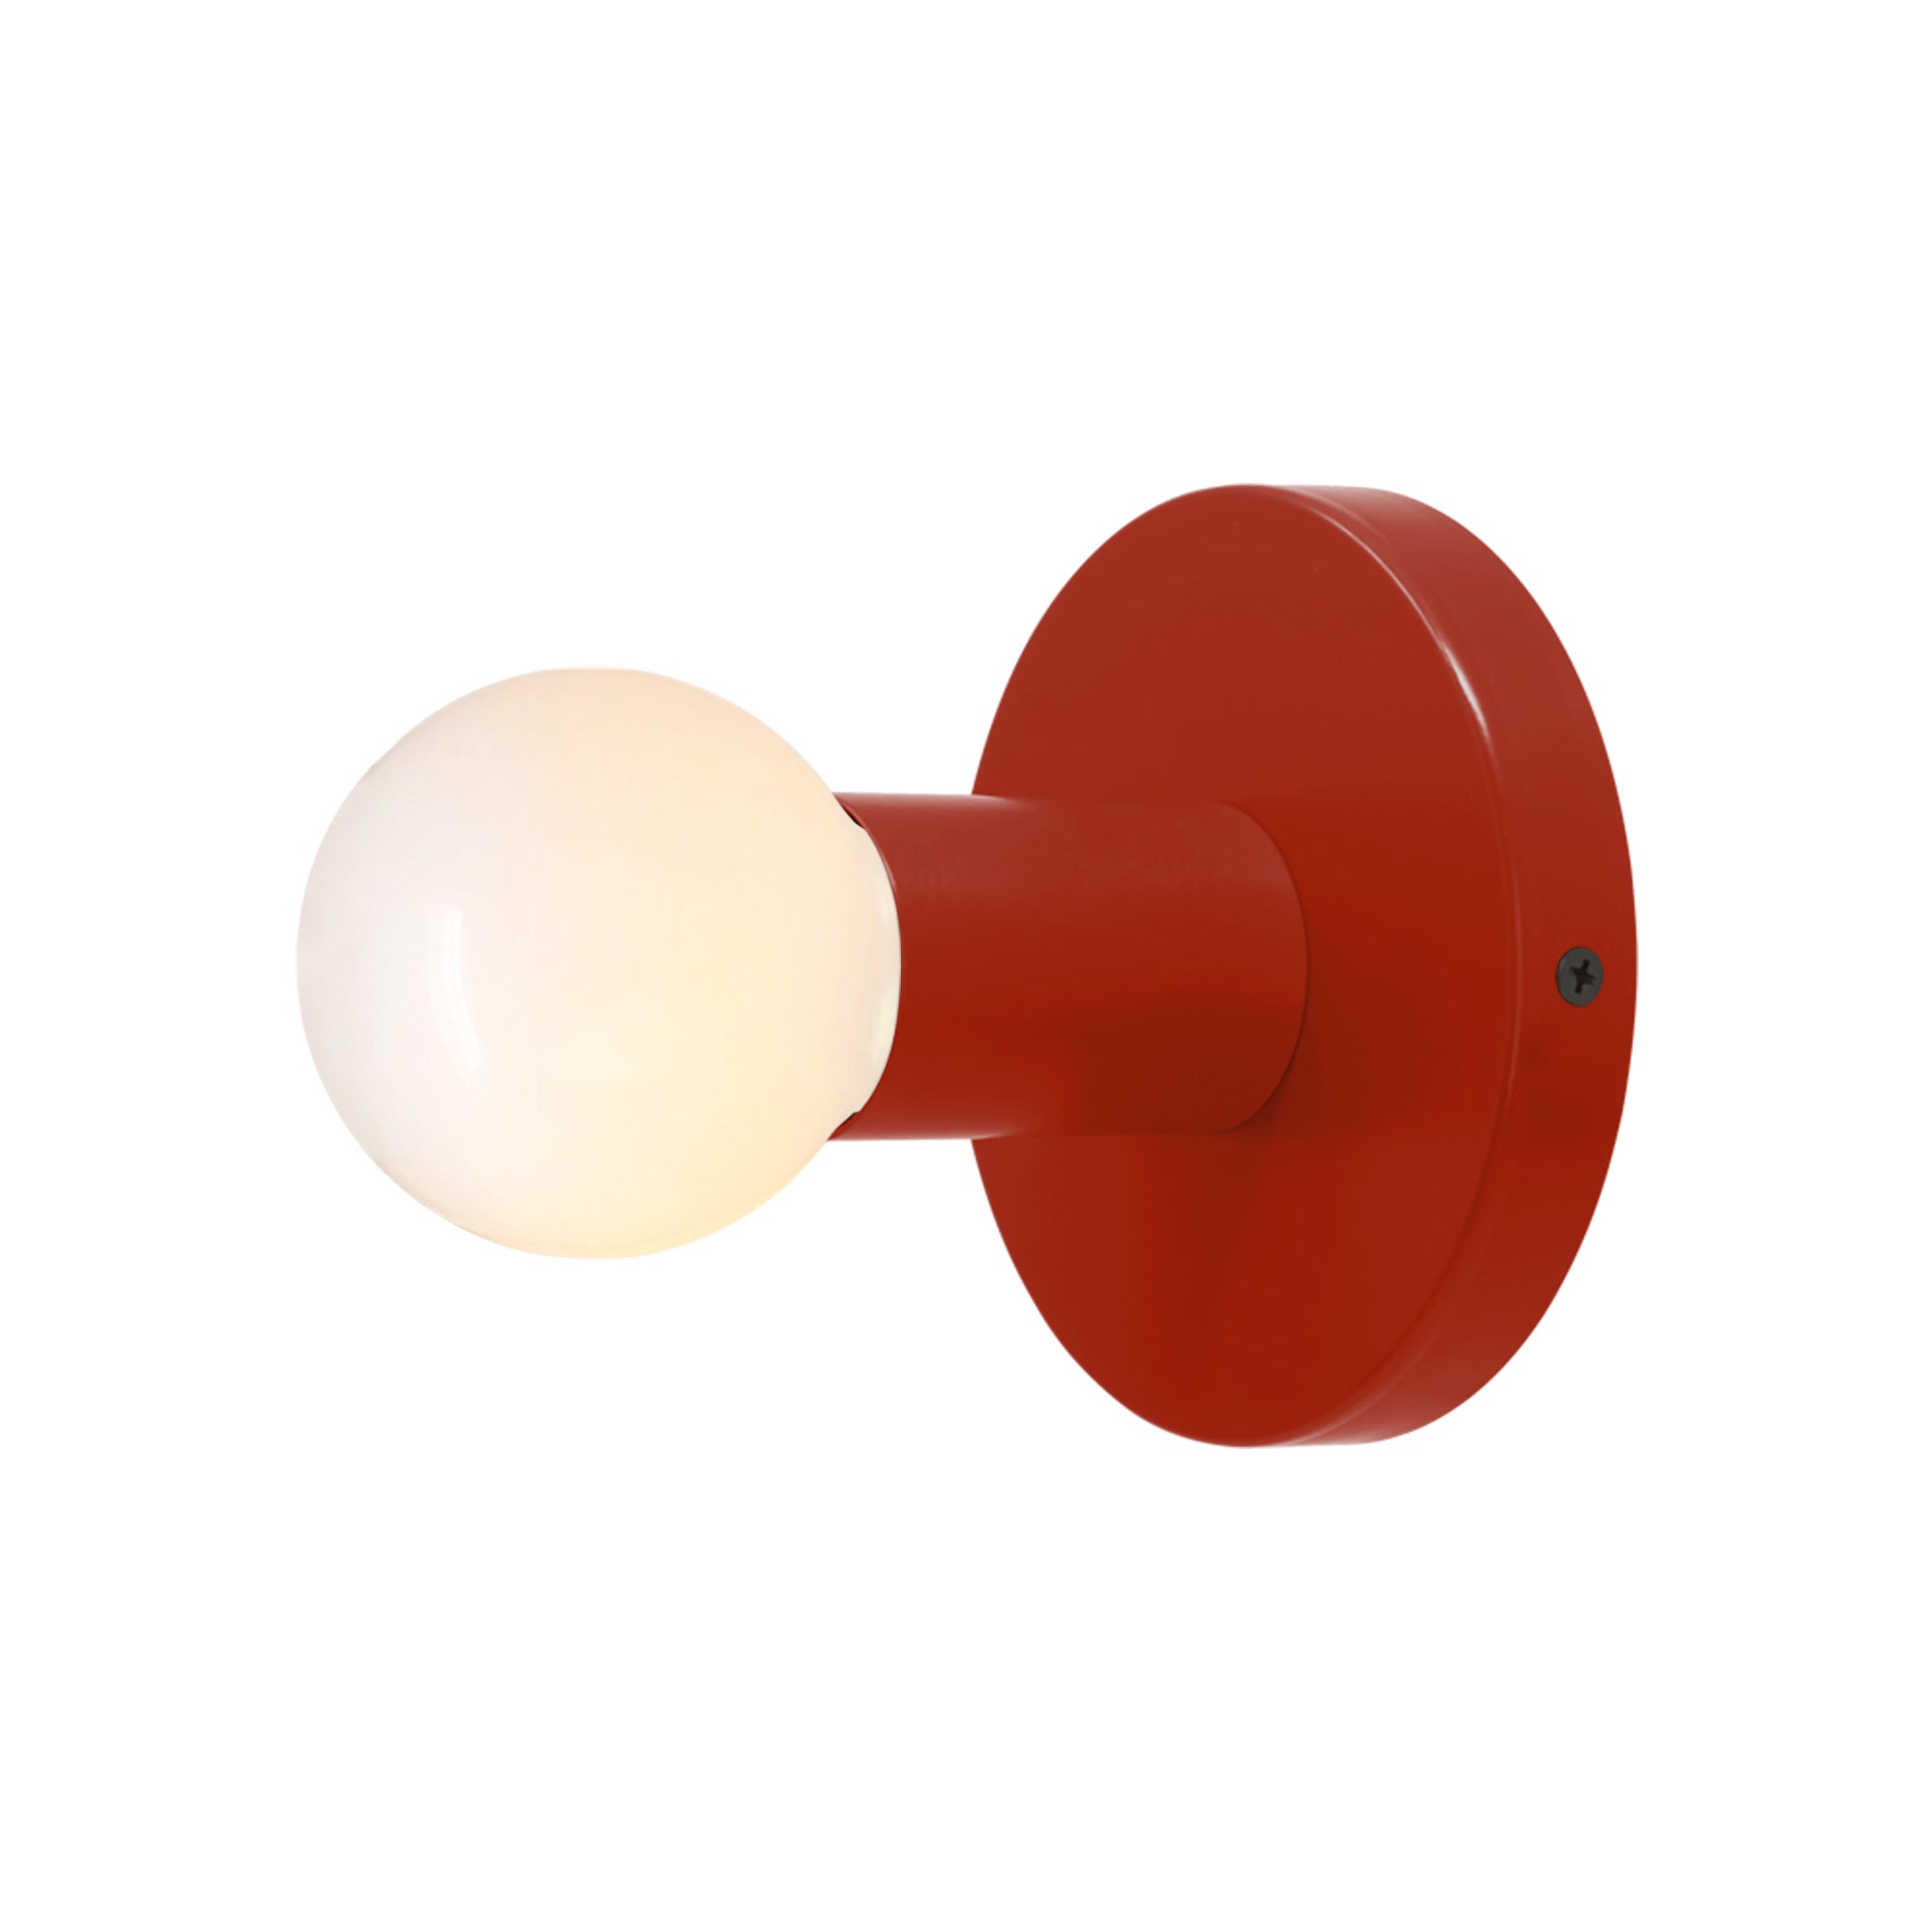 Black and riding hood red color Twink sconce Dutton Brown lighting